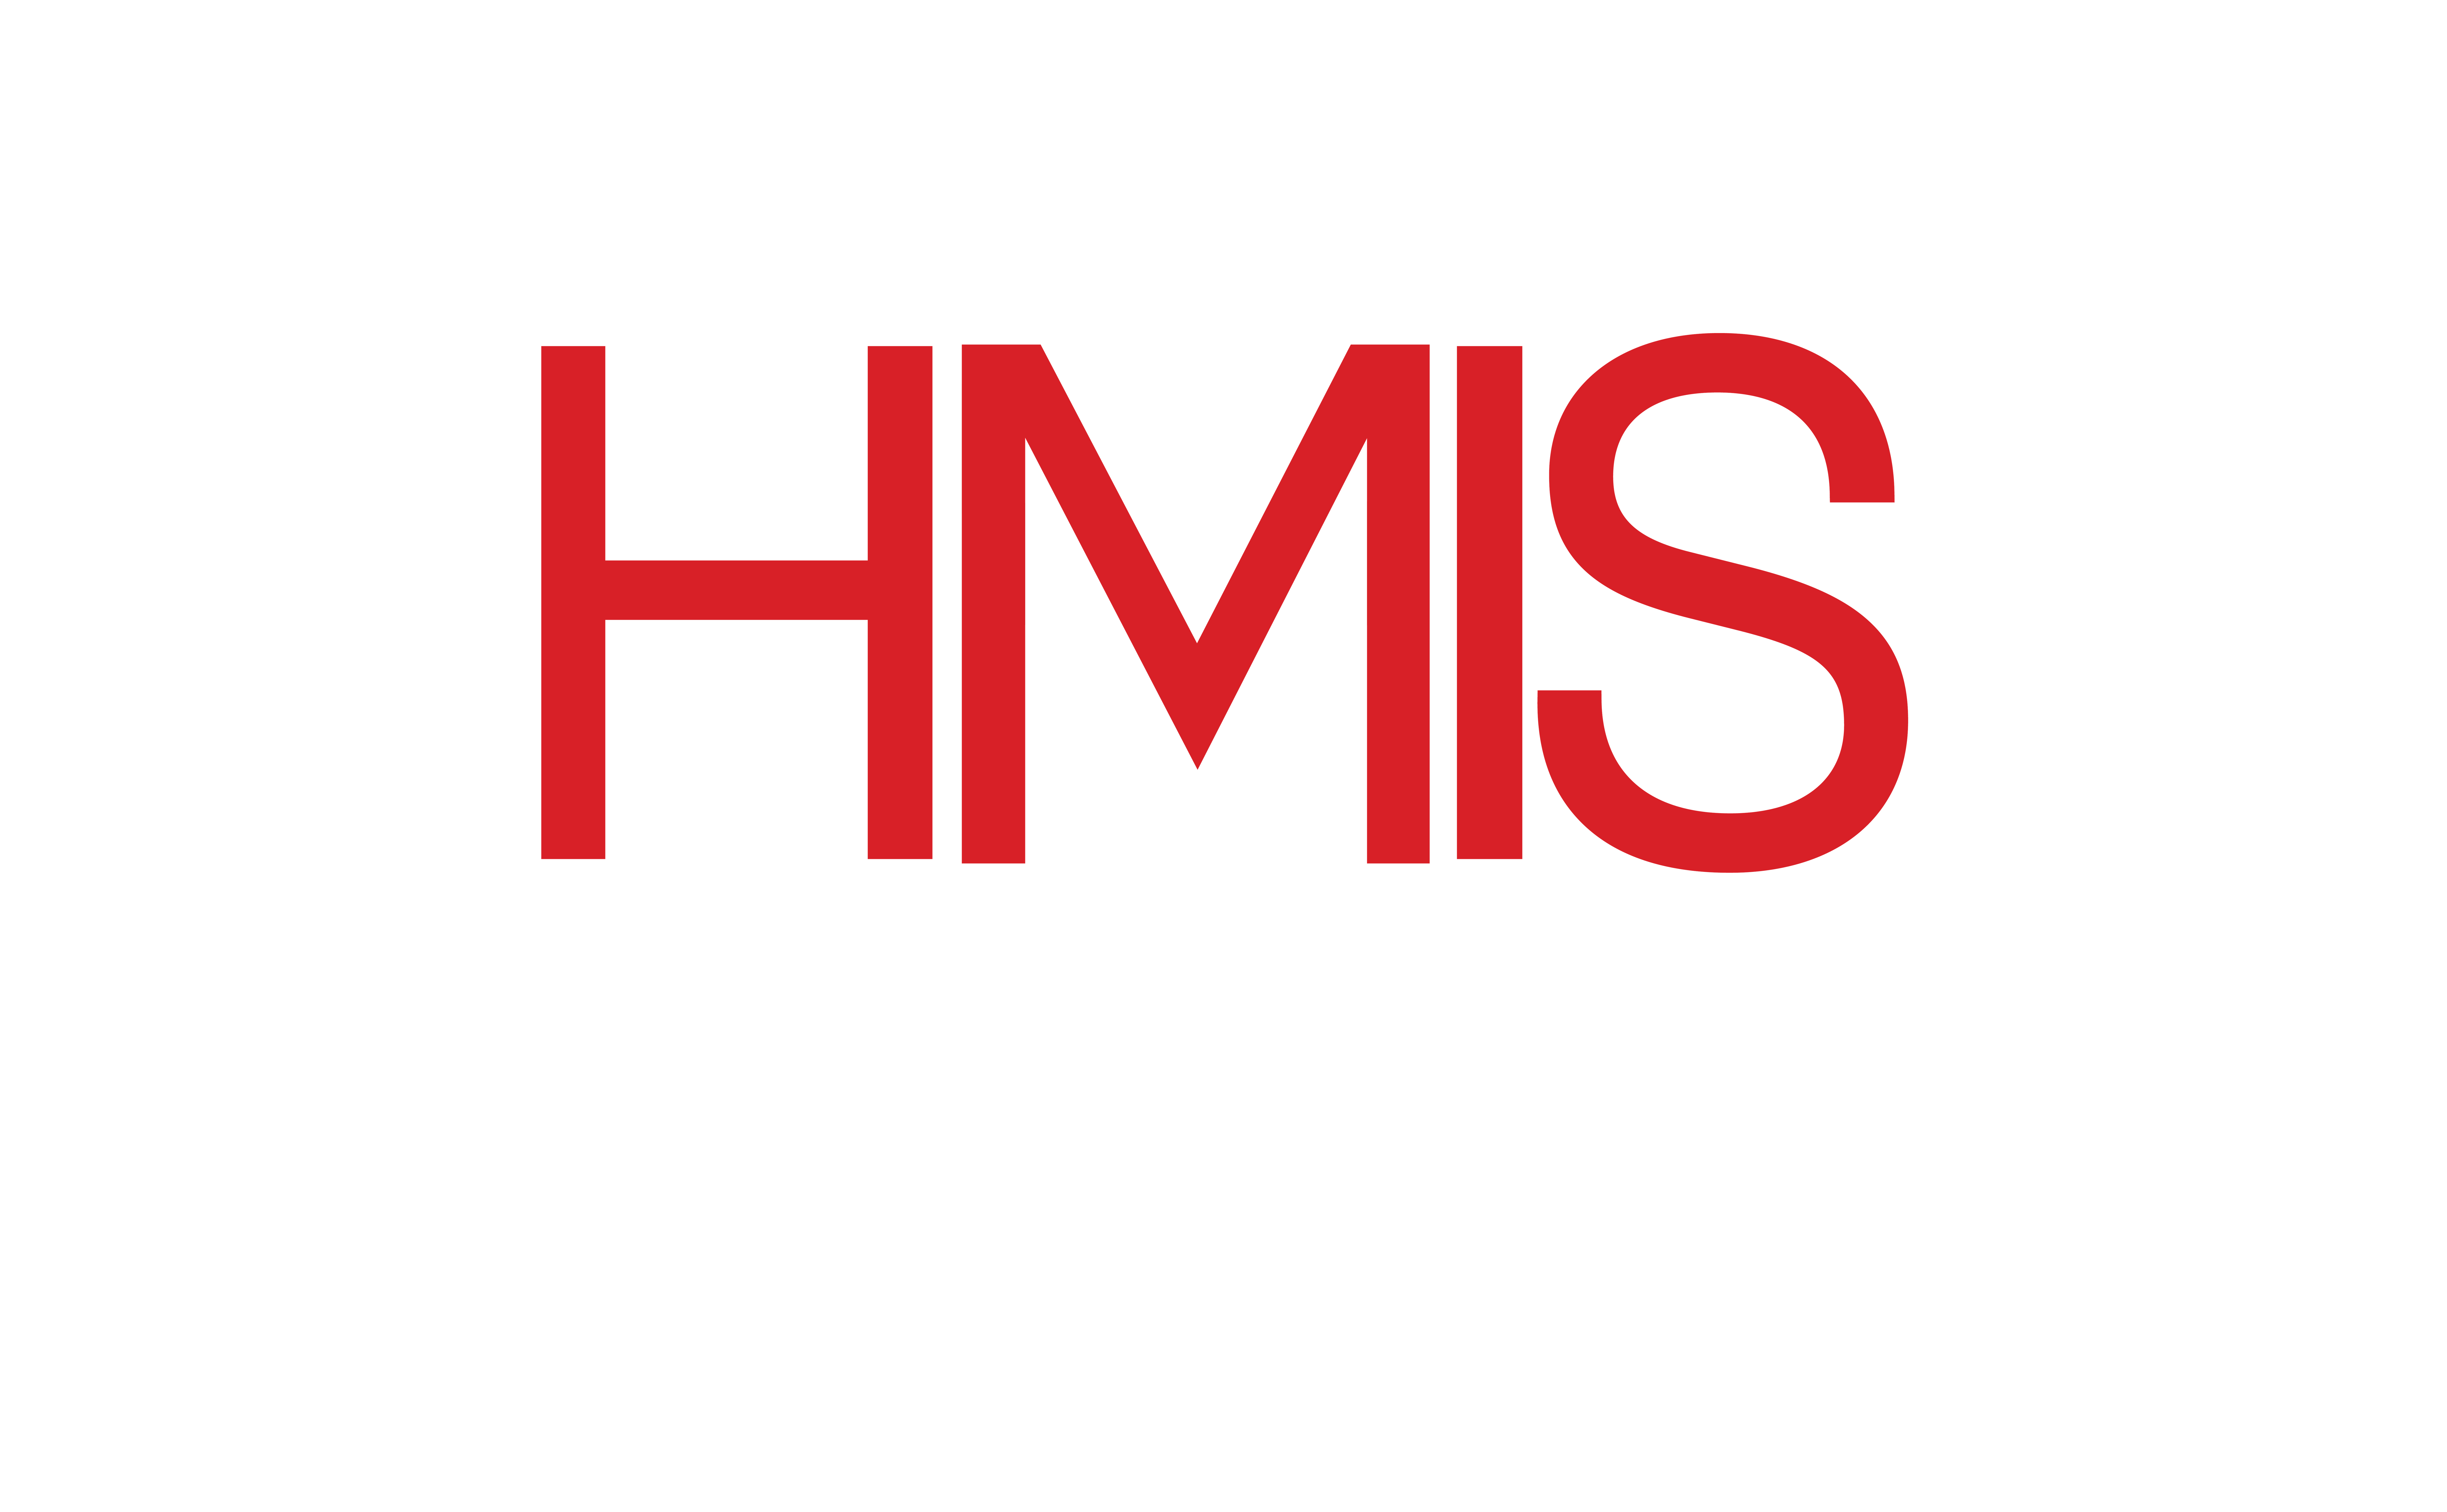 Logo of HMIS Heavy Motor & Machinery Insurance Solutions business